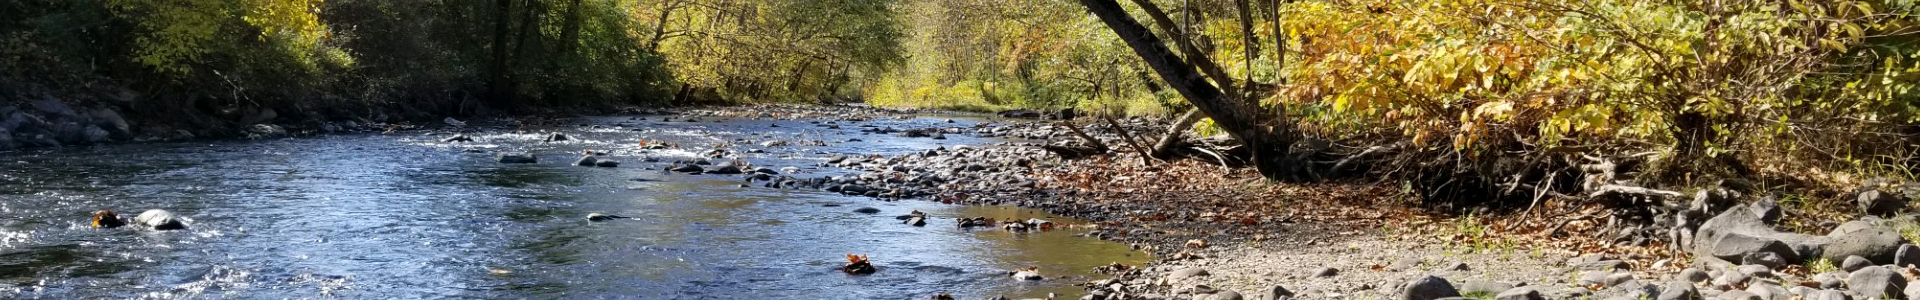 rocky stream surrounded by fall foliage